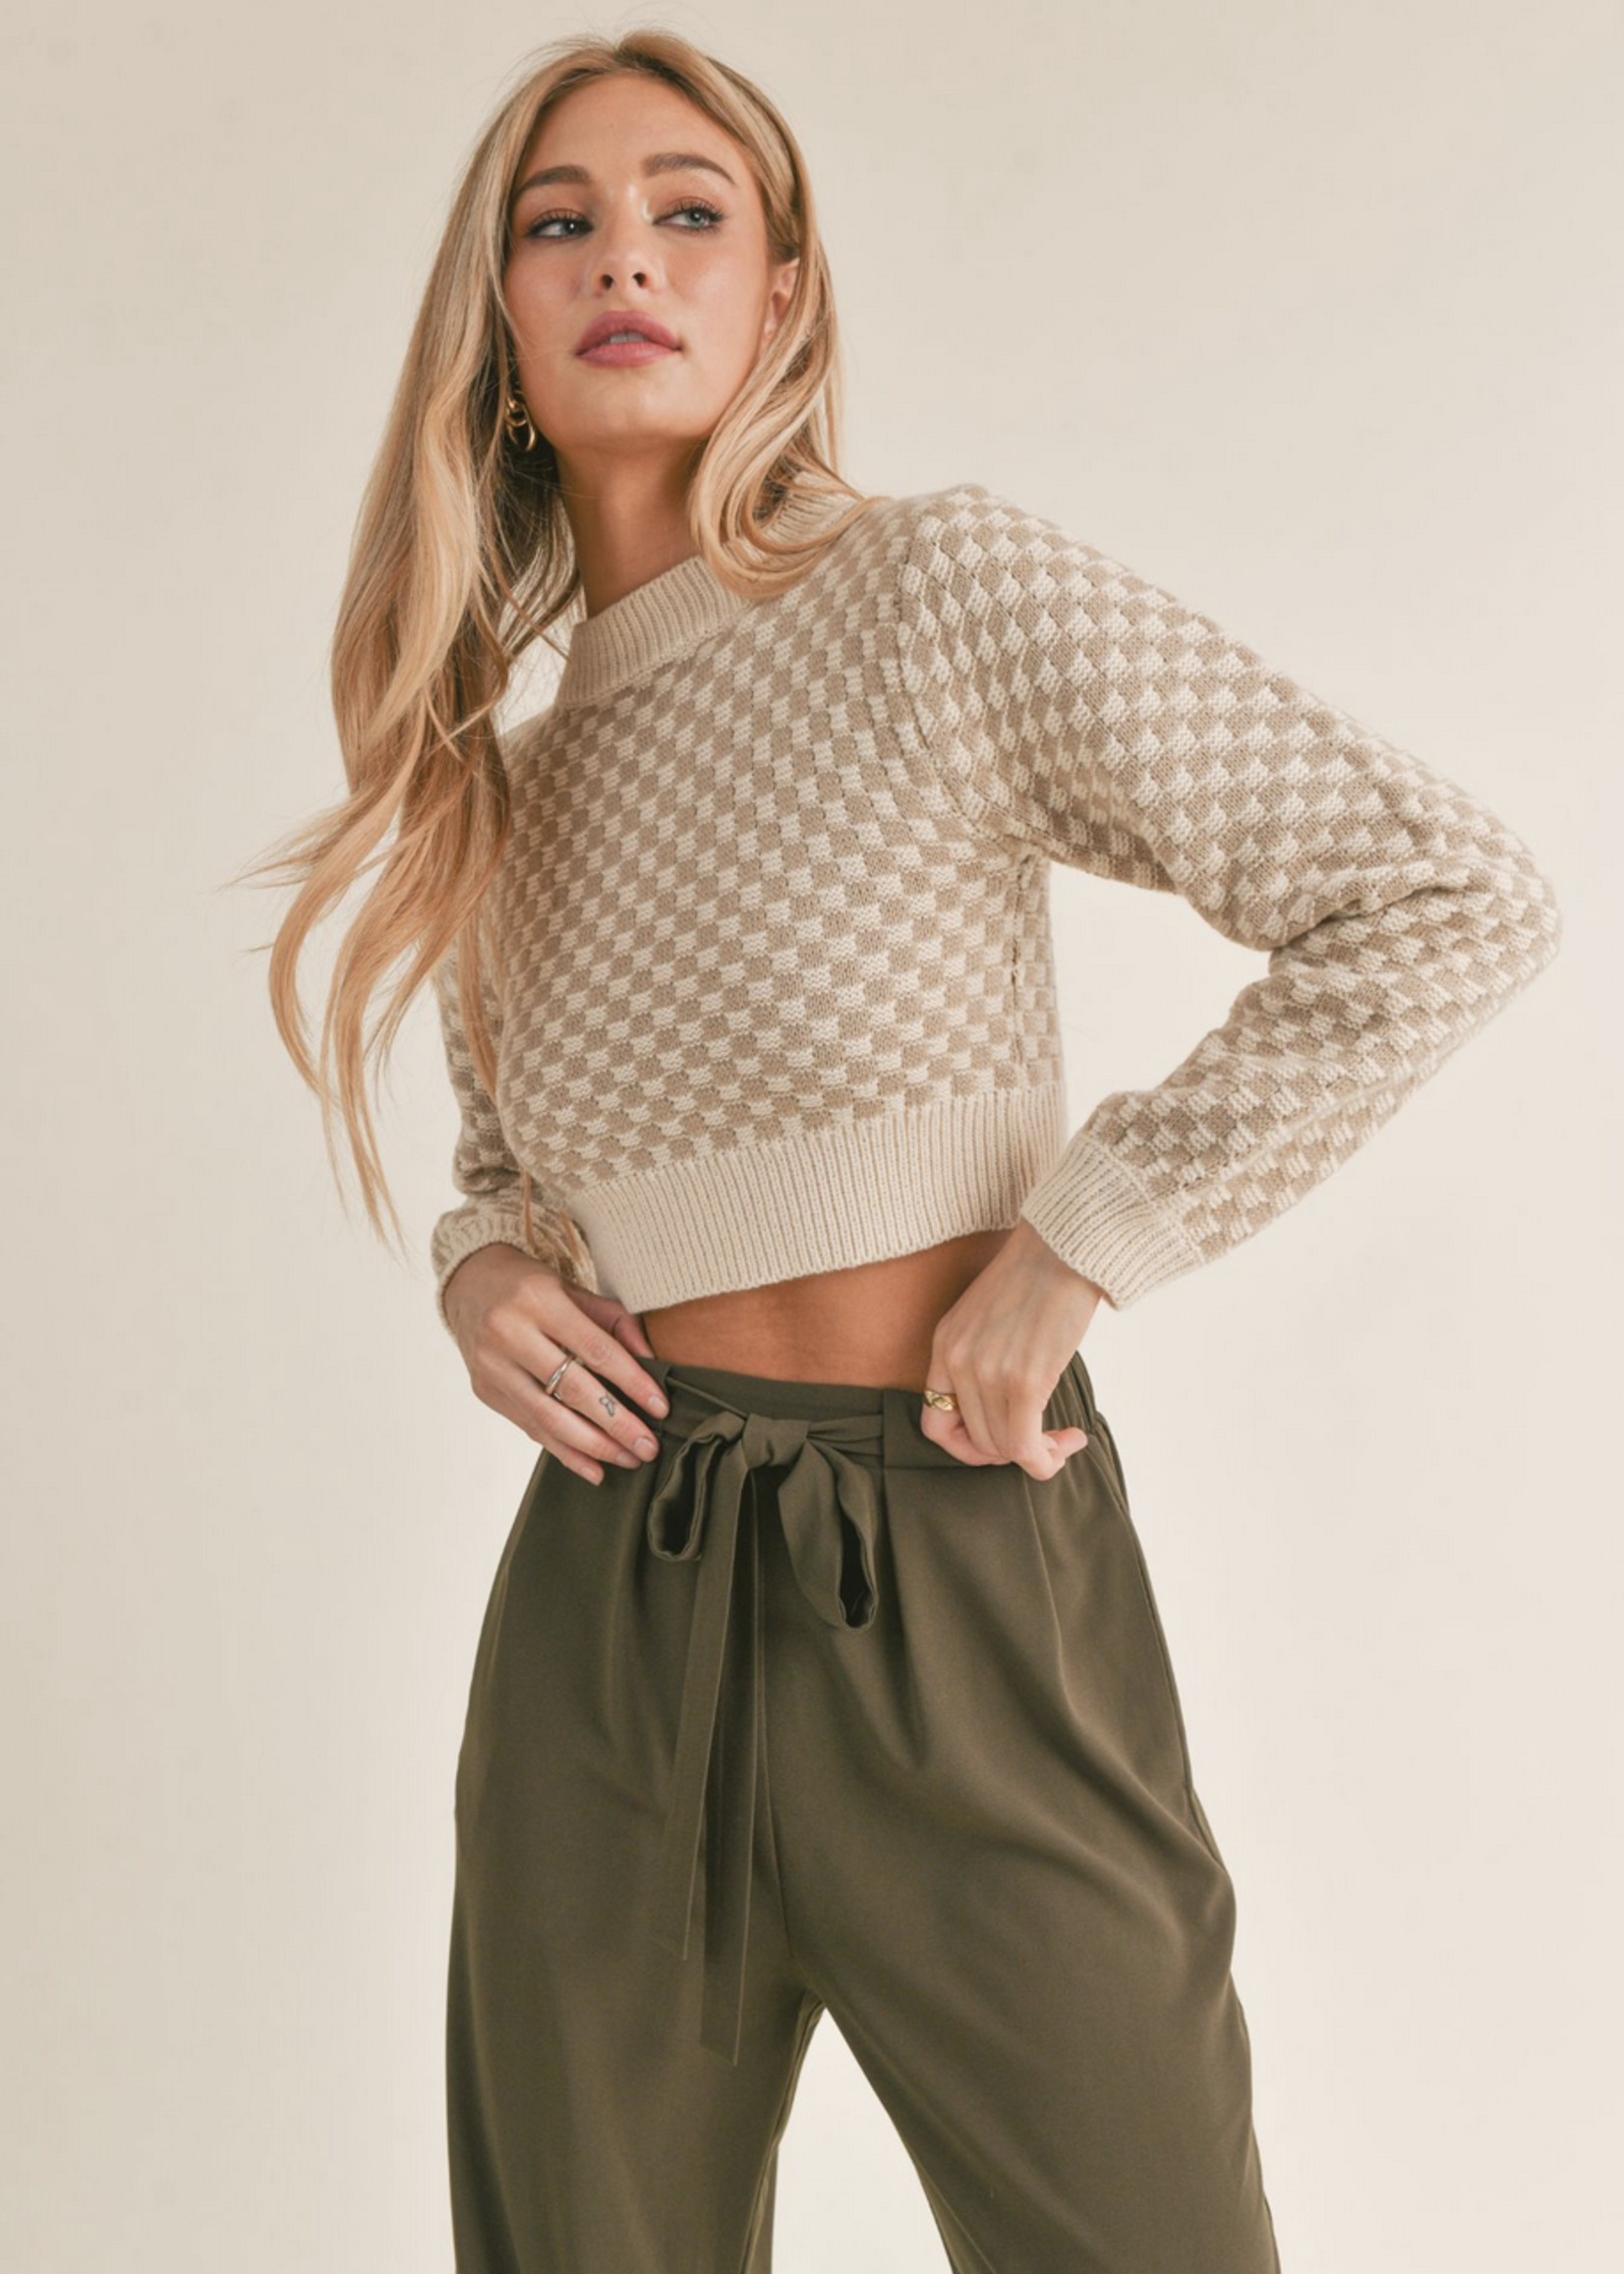 SAGE THE LABEL GREAT THINGS GINGHAM CROP SWEATER